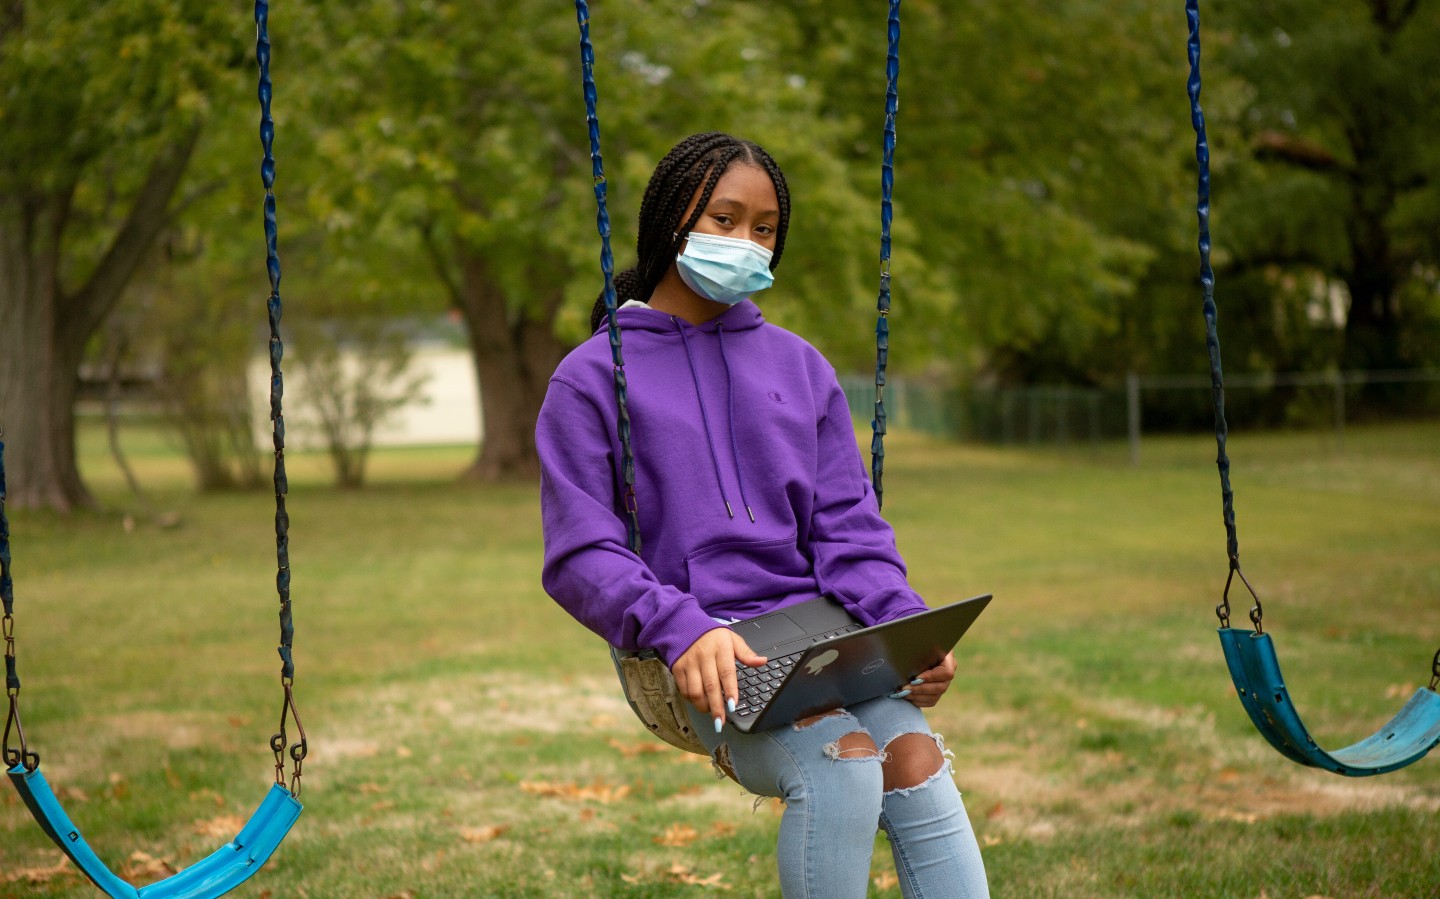 A remote learning student works on an assignment on the swing set at her home.